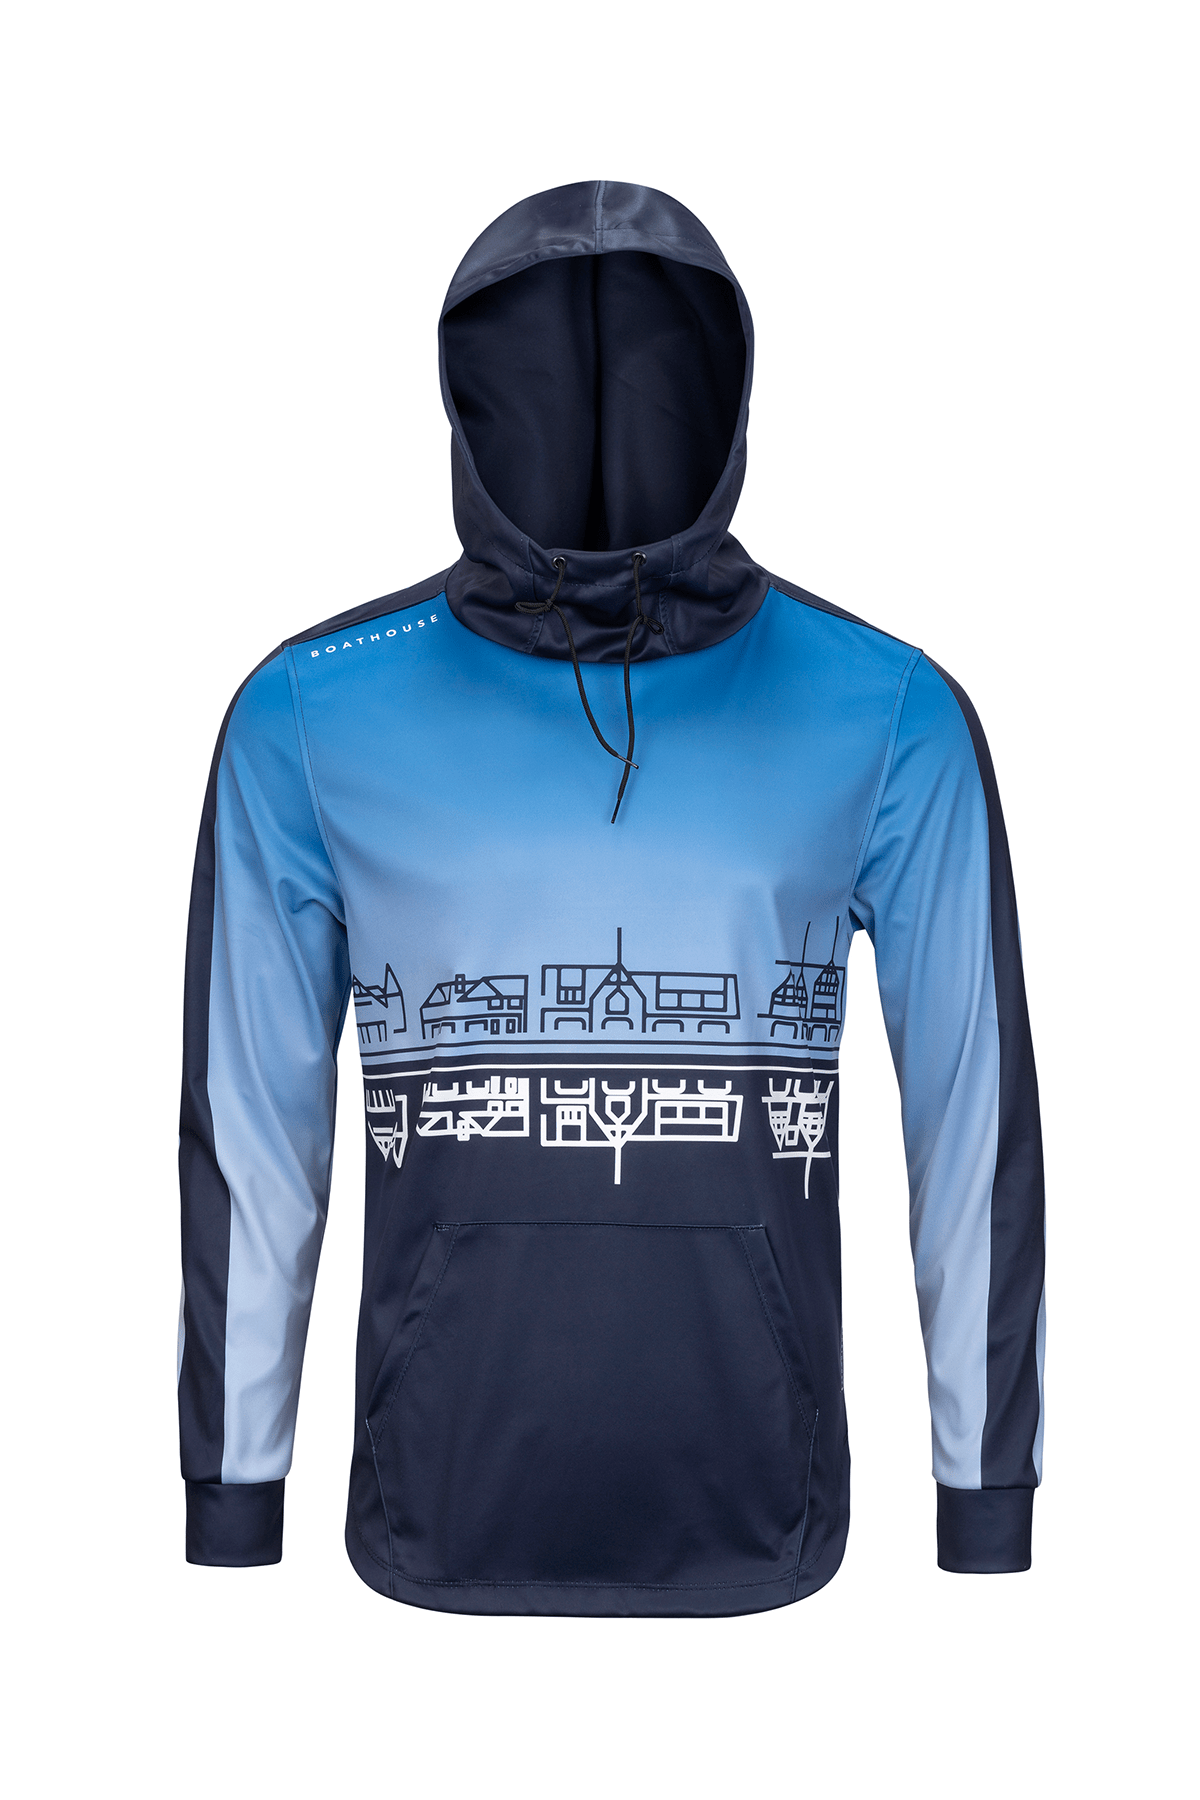 Roots Tailwind Unisex Hoodie Navy / Small